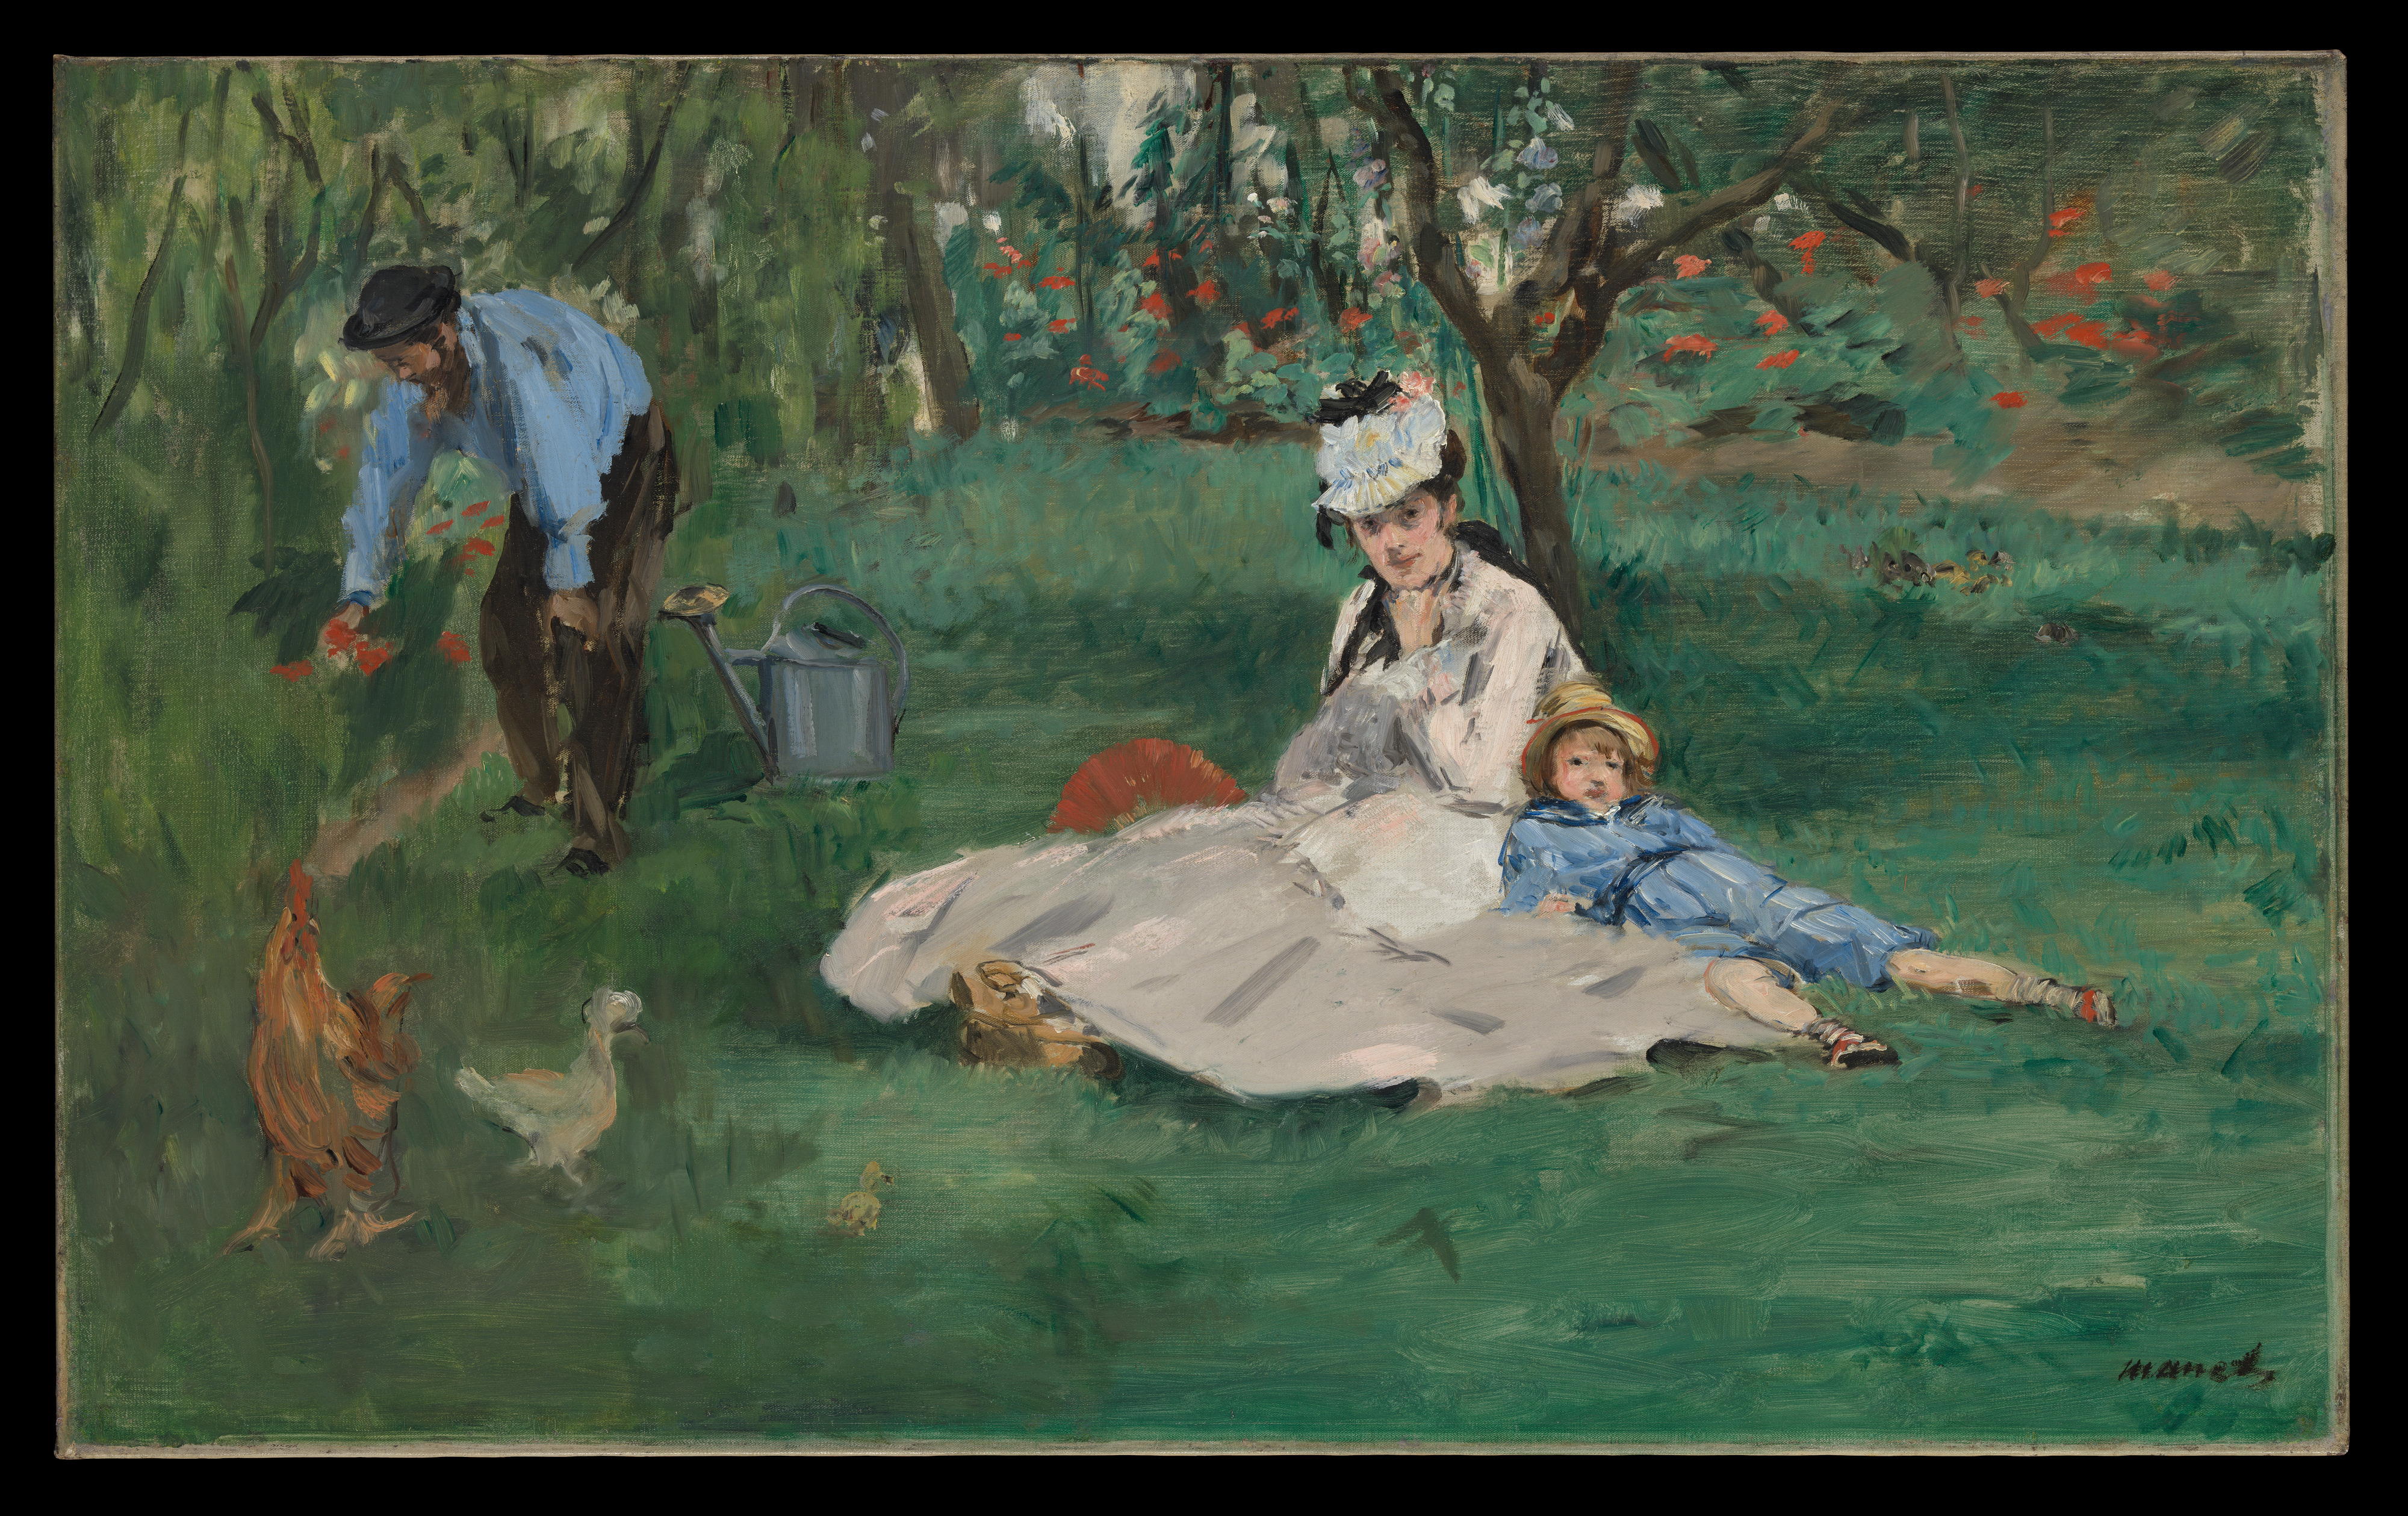 statue of manet painting